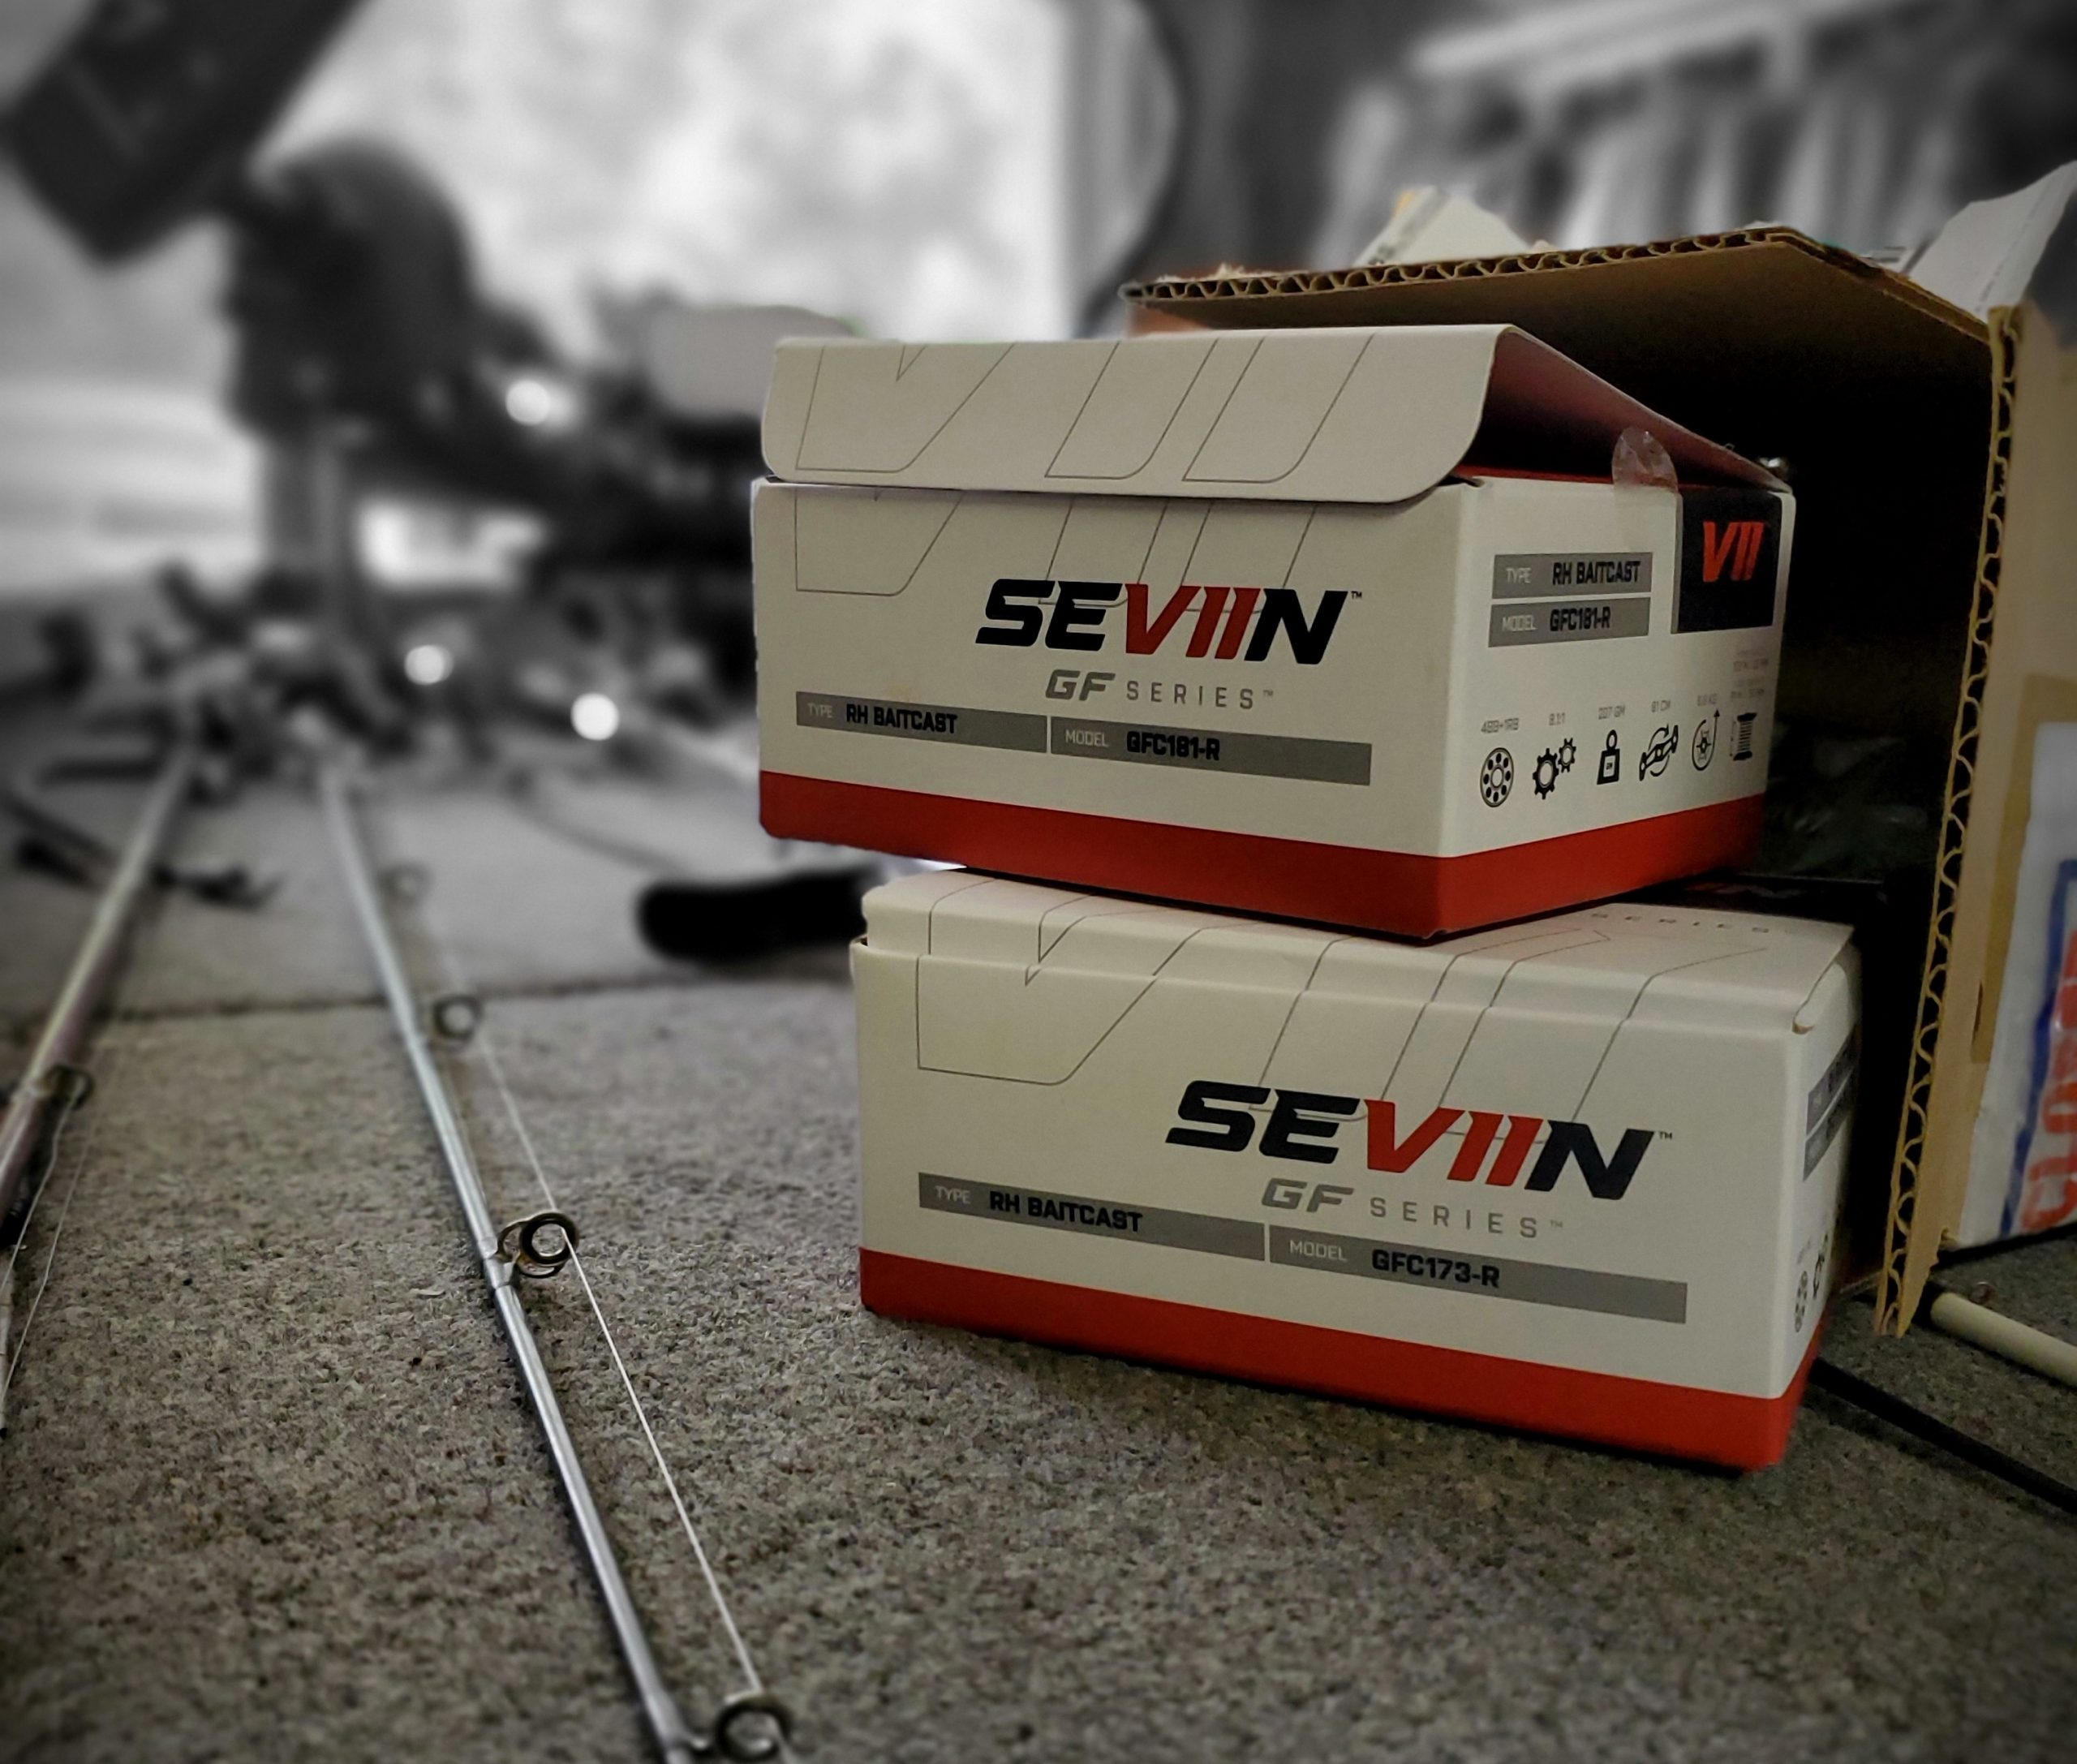 Seviin Features I'm liking right out of the box! – Anglers Channel